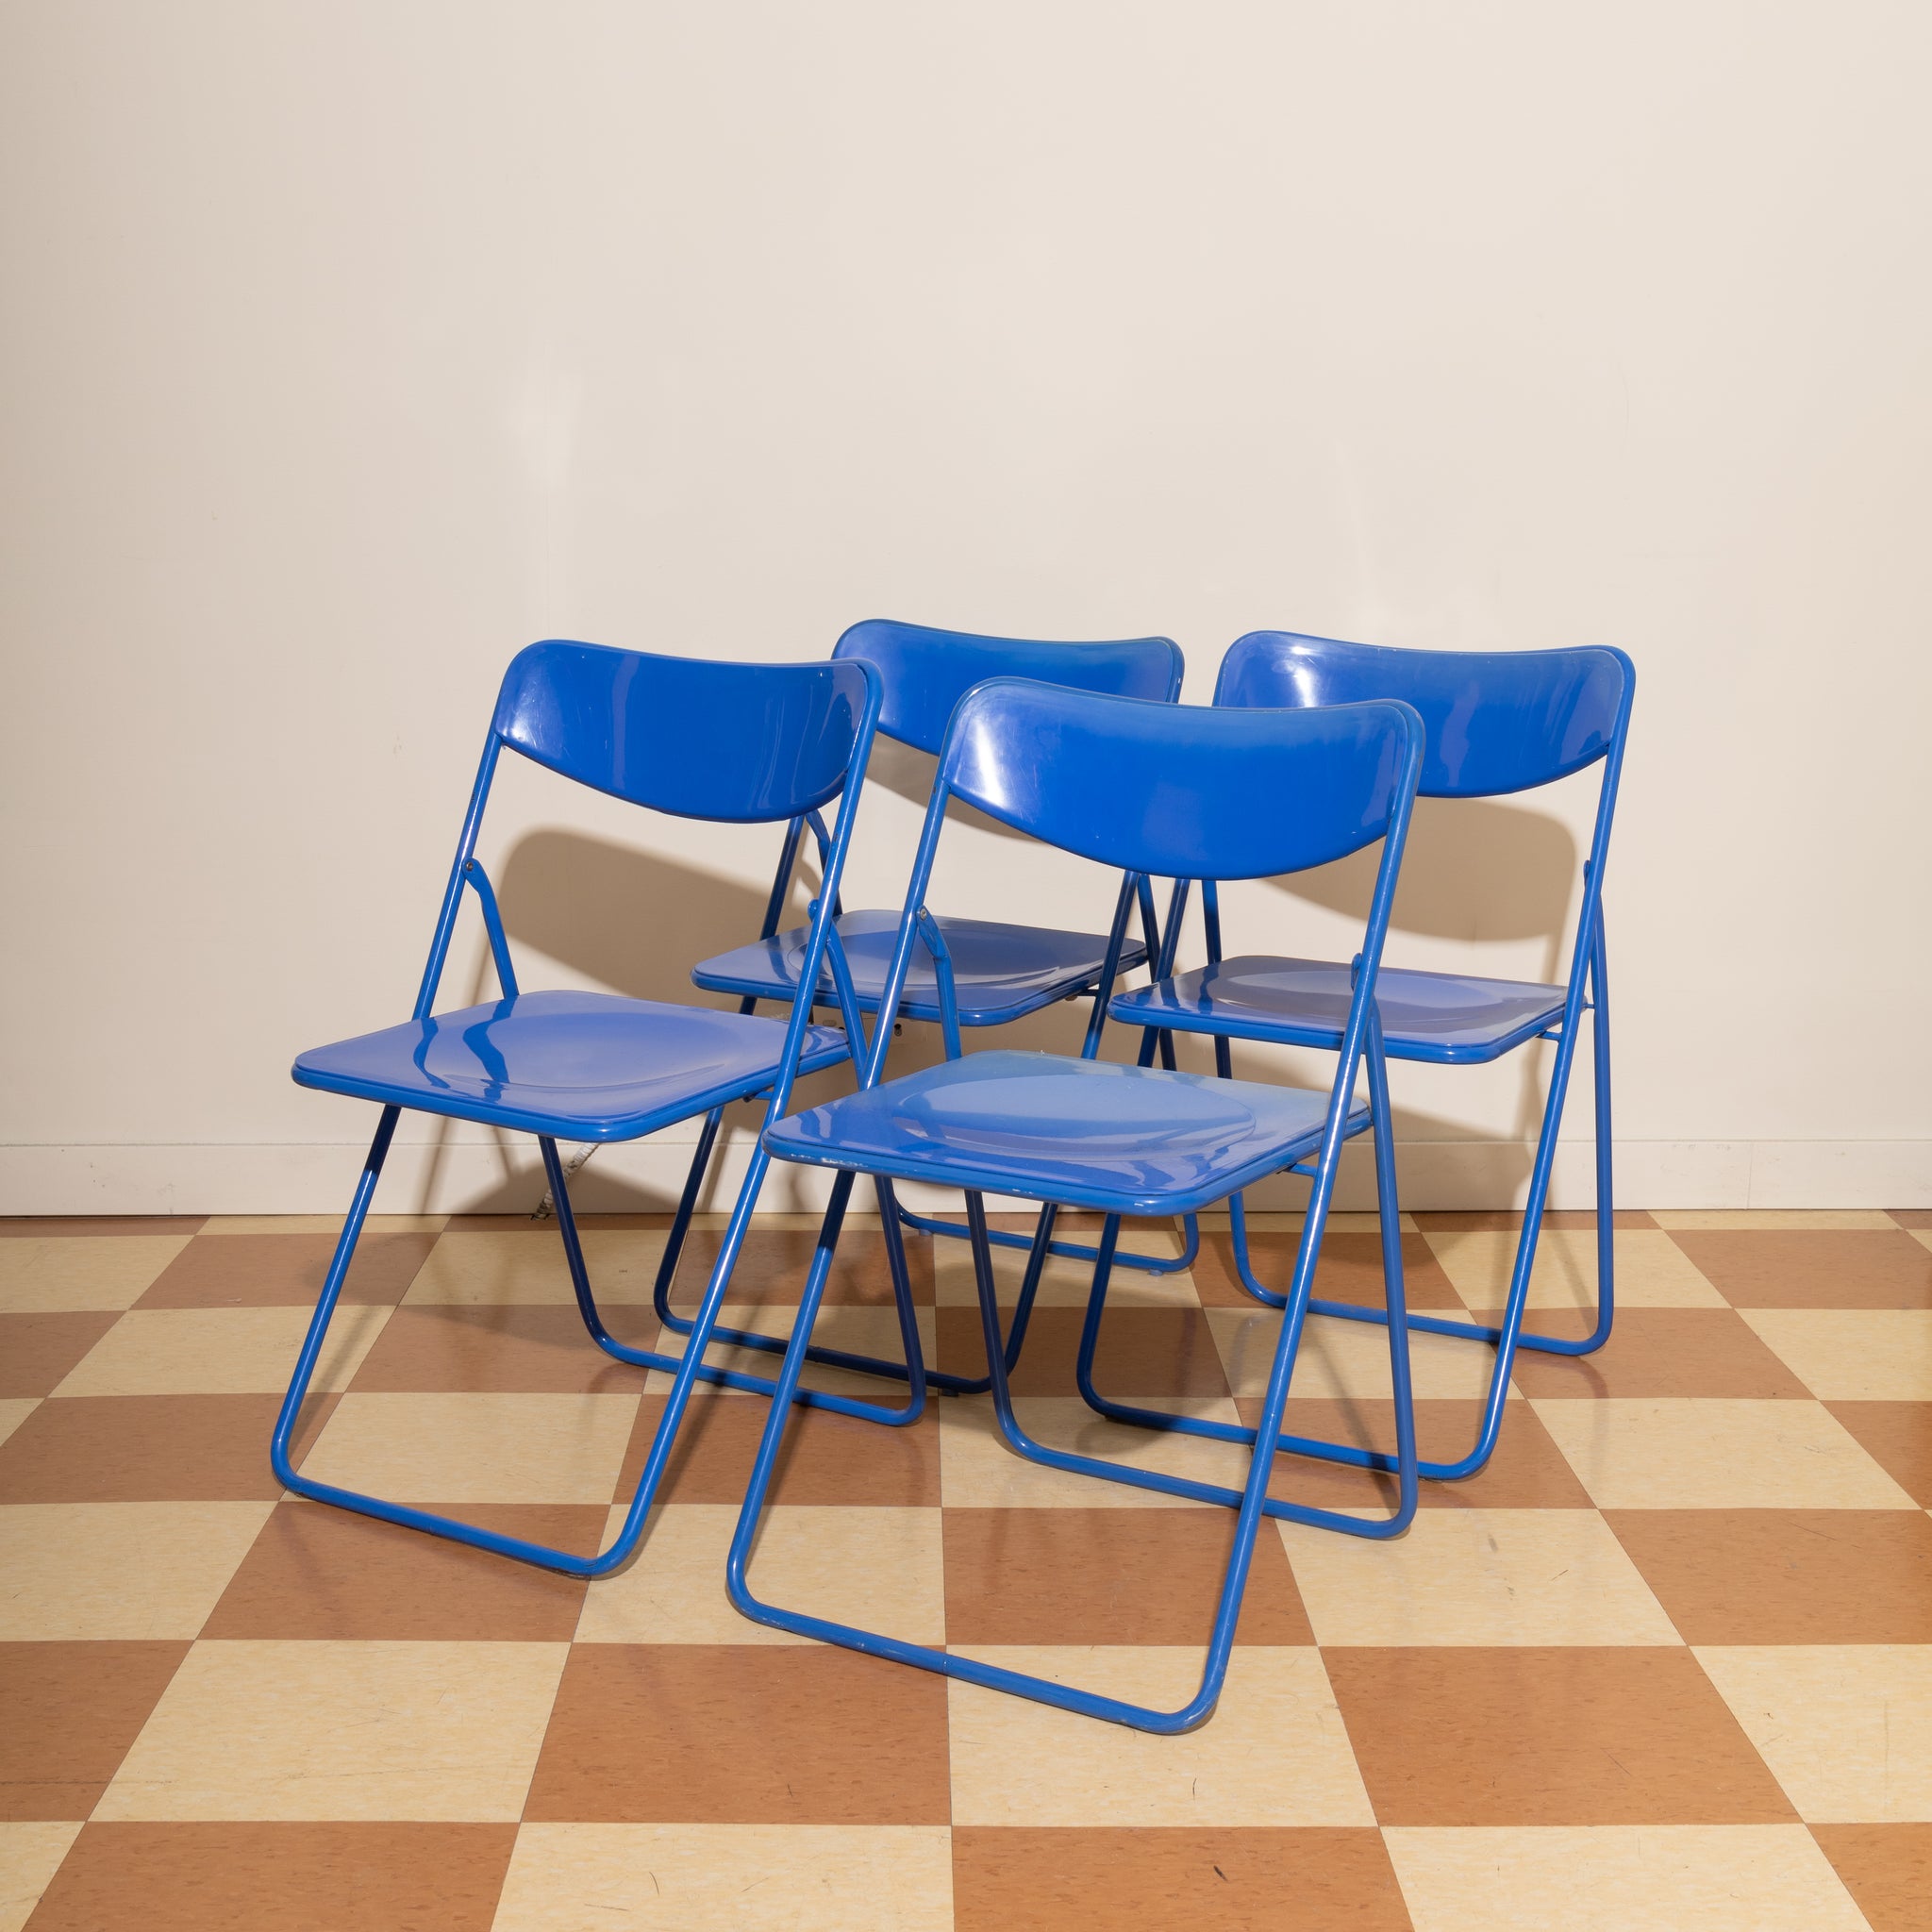 Vintage IKEA 'Ted' Chairs